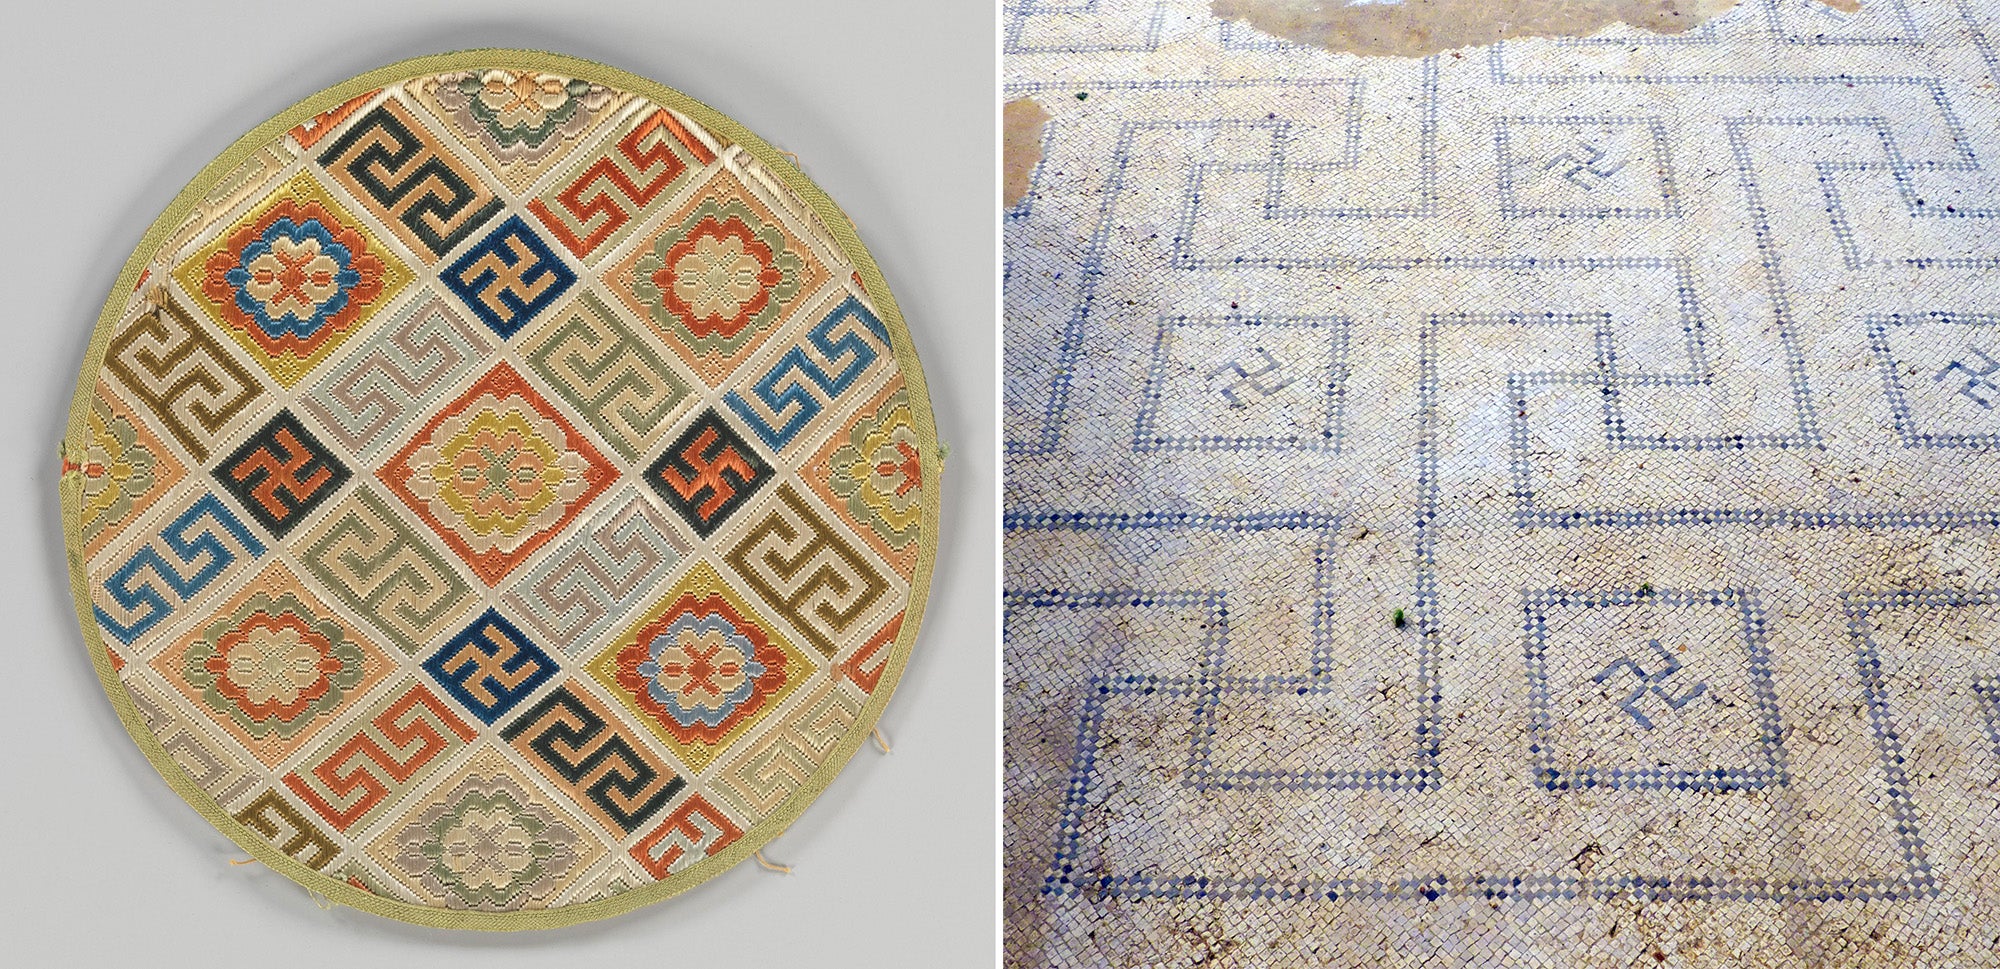 (left) Mirror Case with swastikas from the Qing dynasty in China and (right) Ancient Greek floor mosaic in Italy